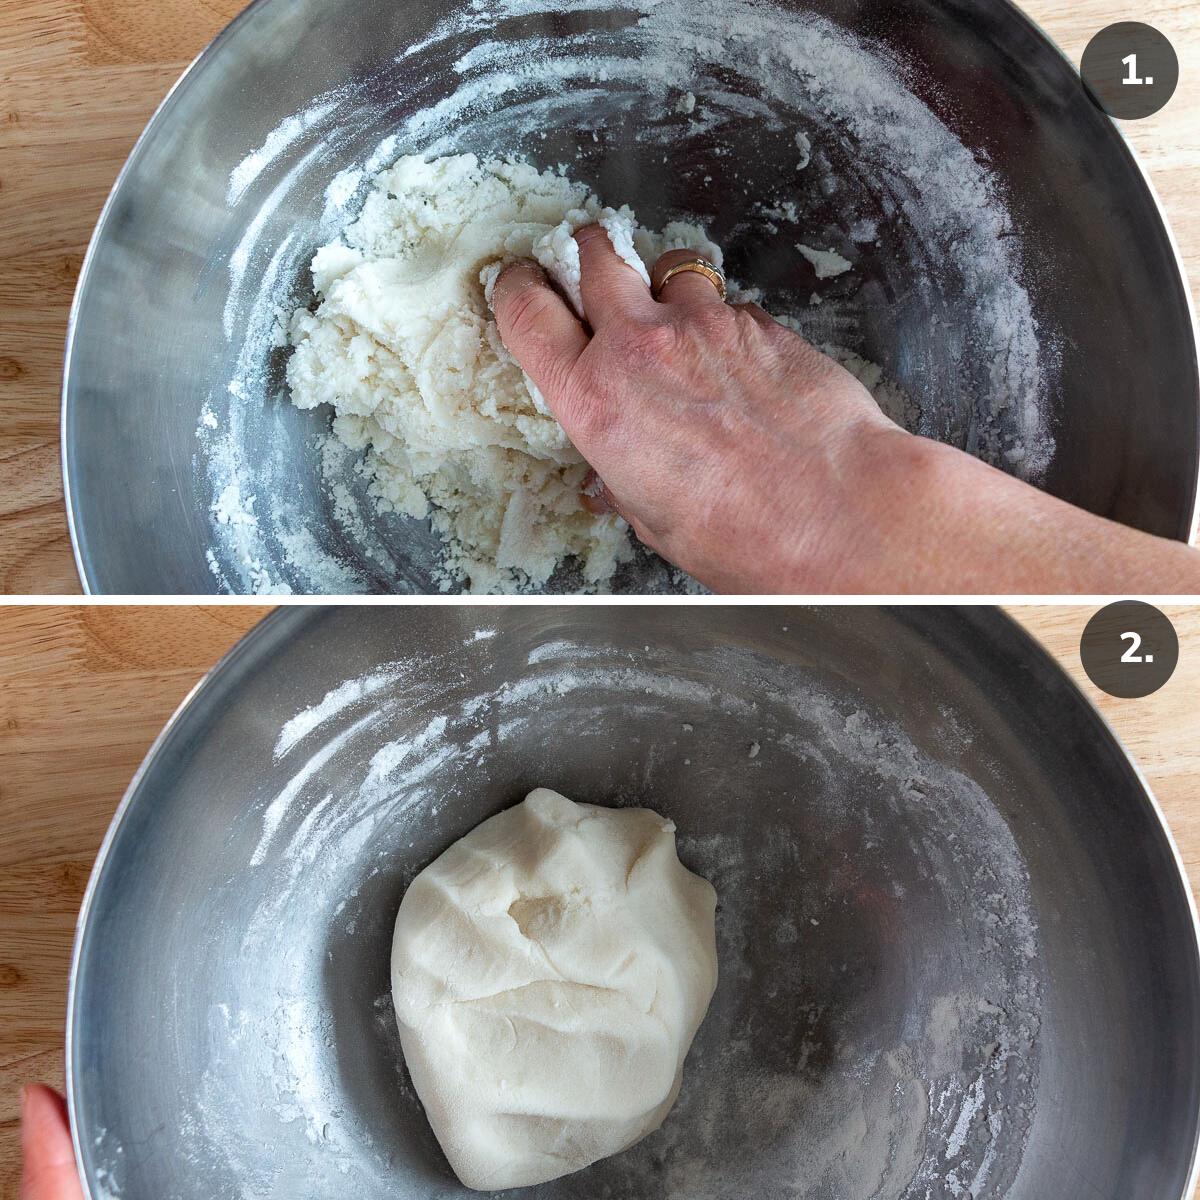 Mixing the glutinous rice flour with the sugar and water.